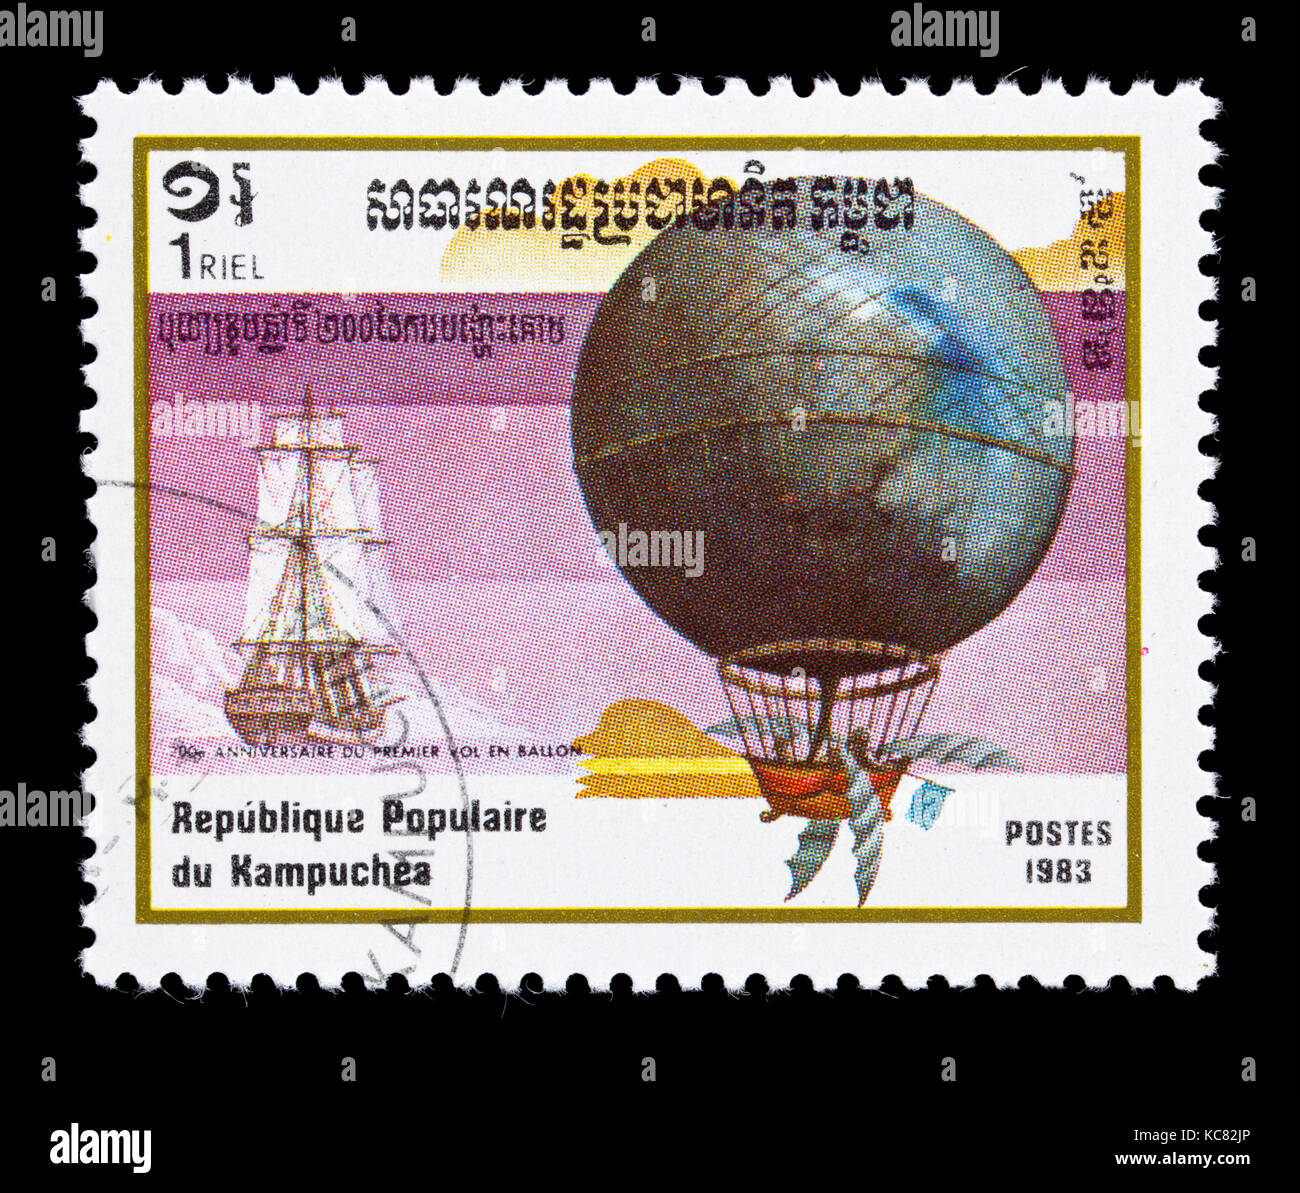 Postage stamp from Cambodia (Kampuchea) depicting Blanchard and JEffries hot air balloon, bicentennial of first hot air balloon flight. Stock Photo